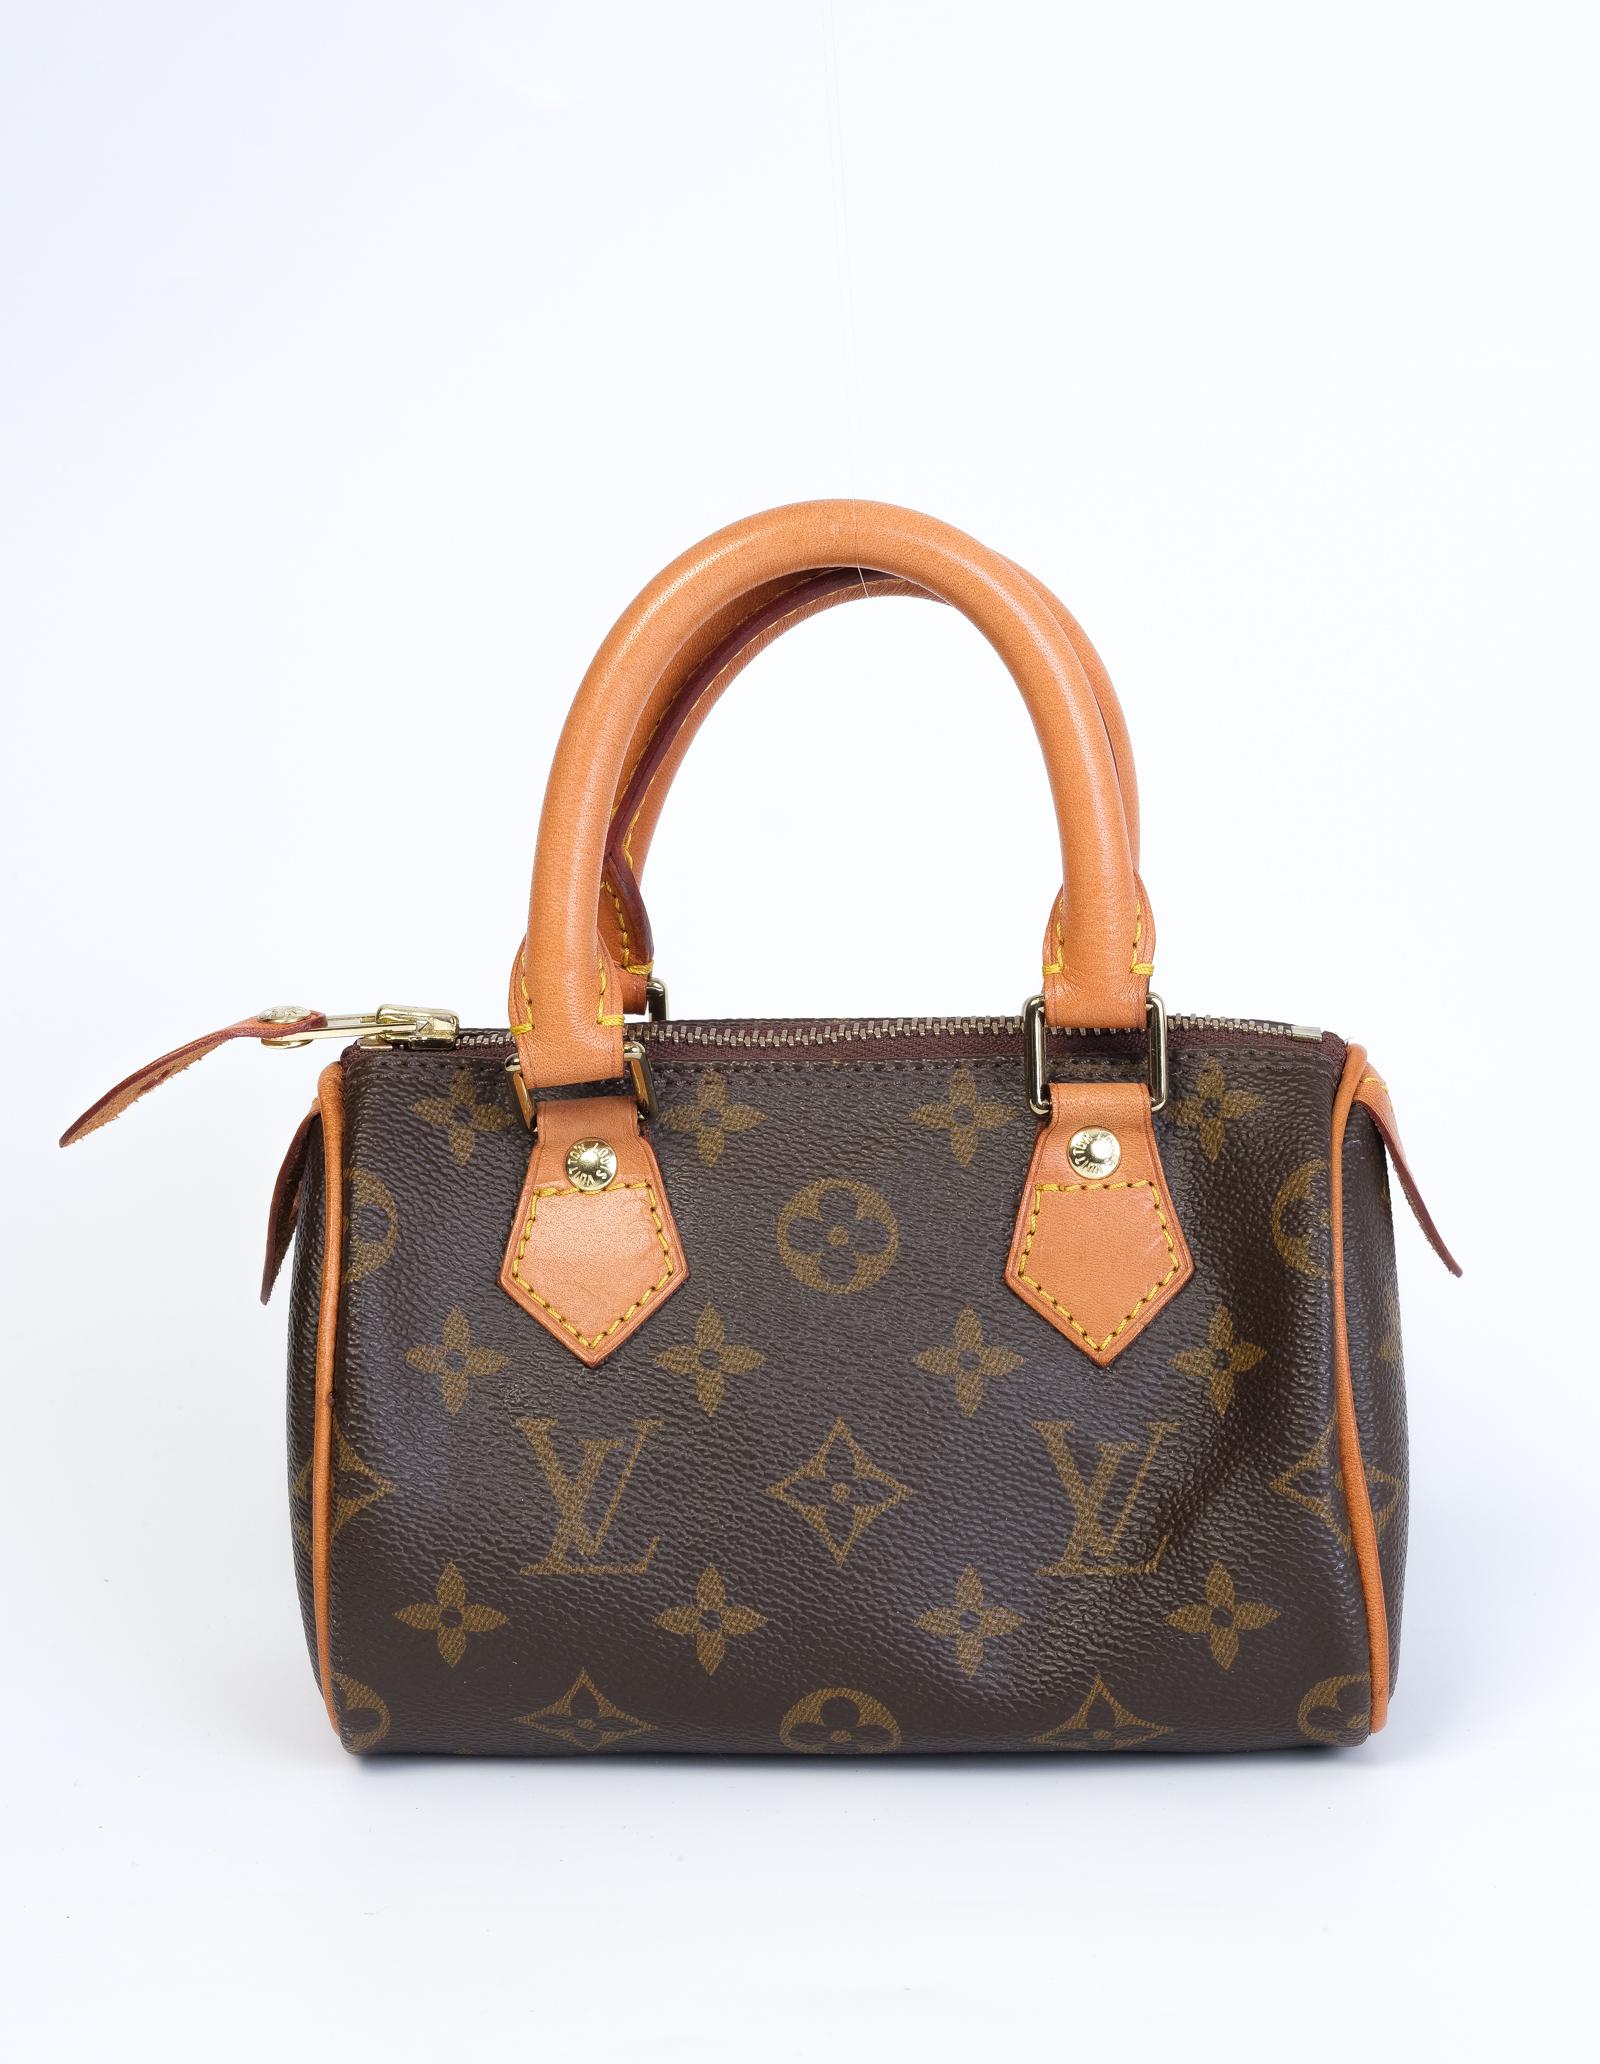 Made with brown monogram canvas and features tanned natural leather finishes, dual rolled top handles, top zip closure and brown woven fabric interior. Comes with an attachable strap (bandouliere means strap in French) for should or crossbody cary.